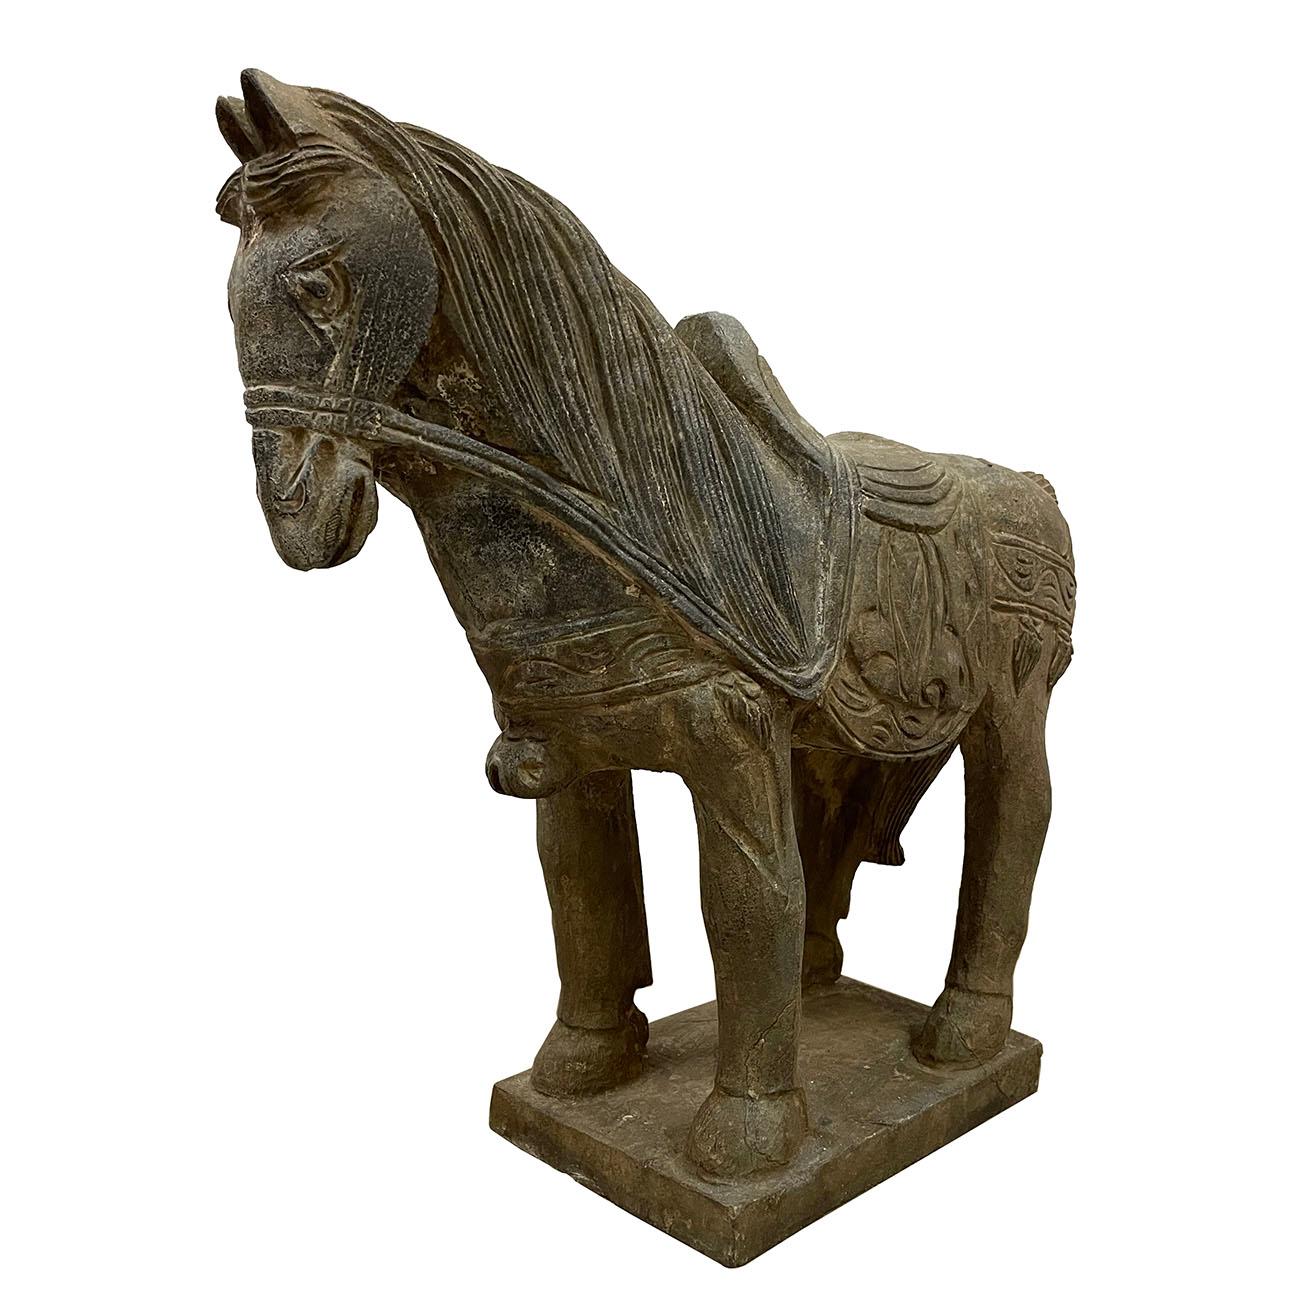 This vintage Chinese noble steed horse sculpture is hand craft with exquisite detail which was very common in horse sculptures crafted during the Tang Dynasty. Especially for imperial family use. This sculpture is replica from early 20th Century